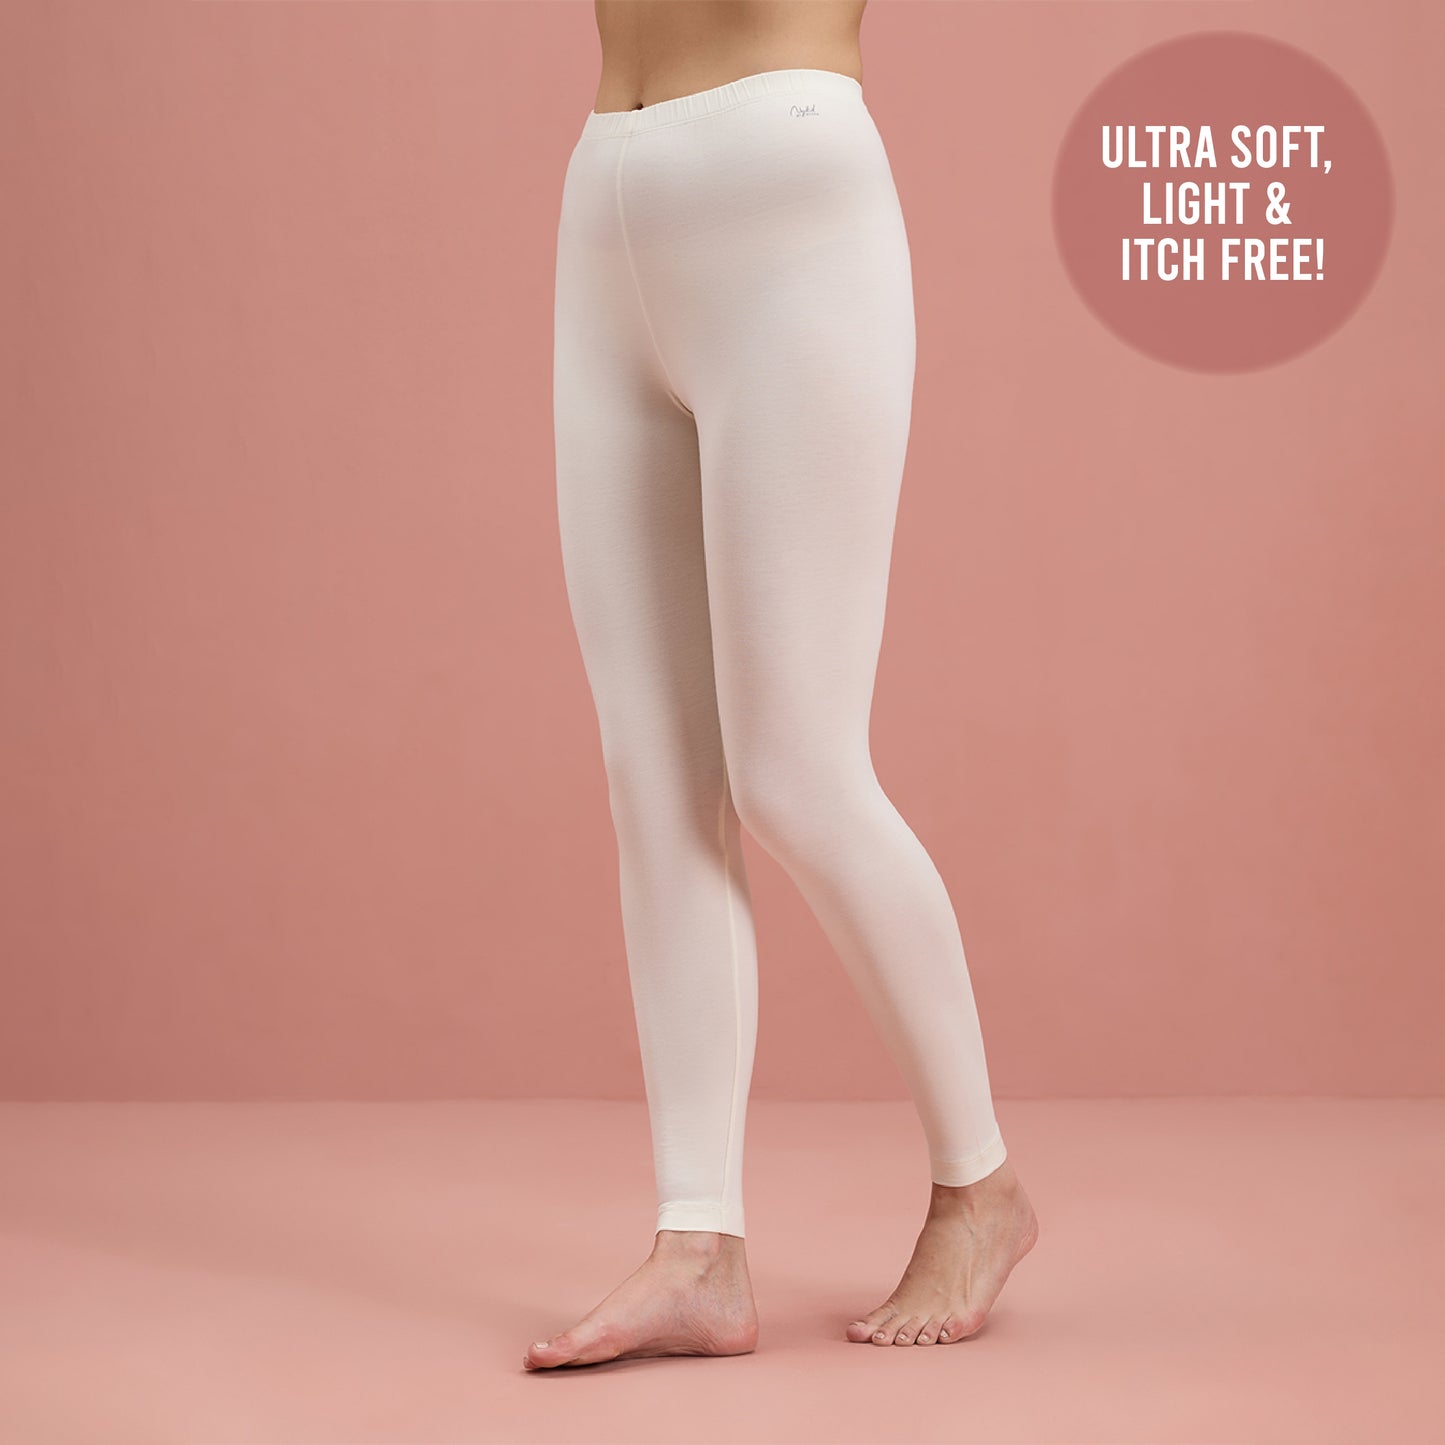 Ultra Light and Soft Thermal Leggings that stay hidden under clothes - NYOE06 White